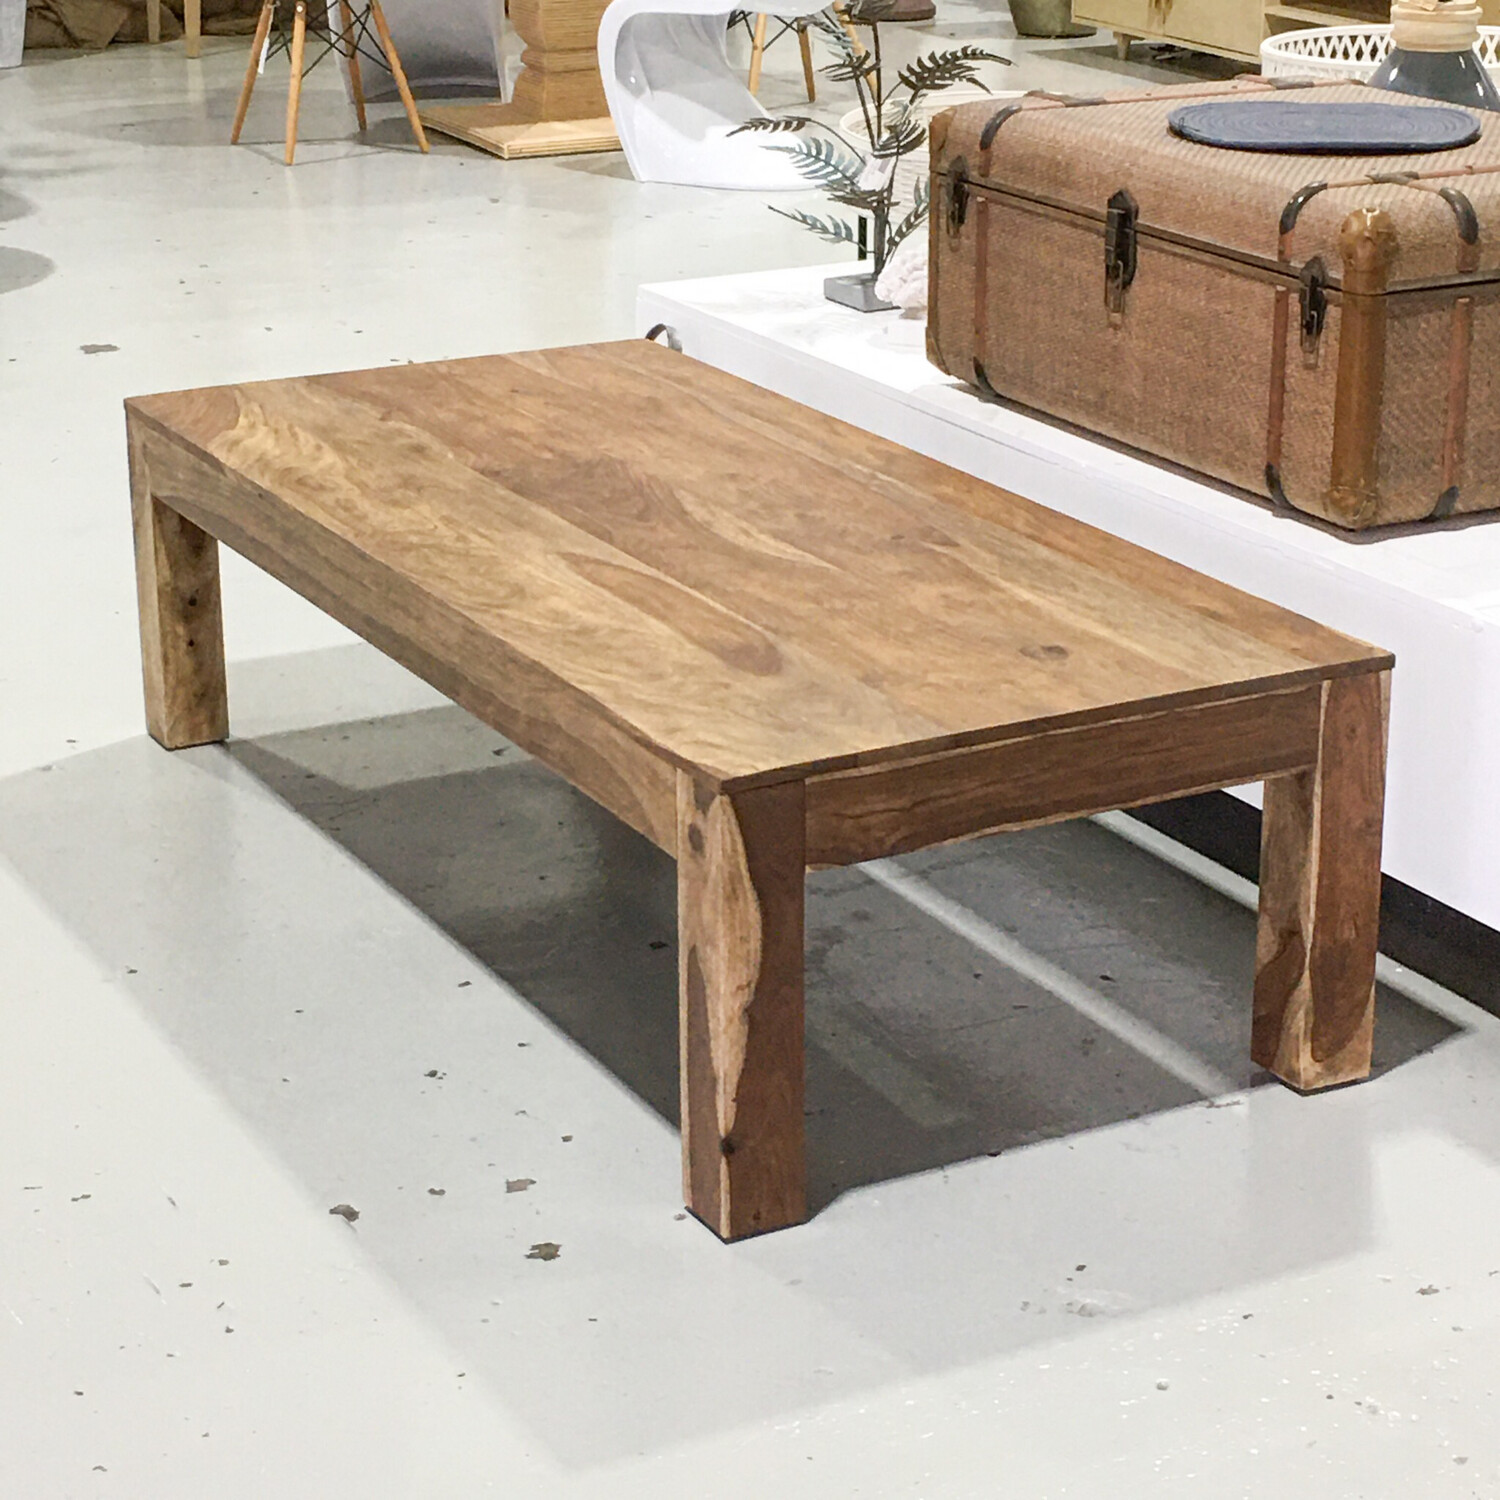 Wooden Coffee Table 165cm x 75cm x 45cm Natural